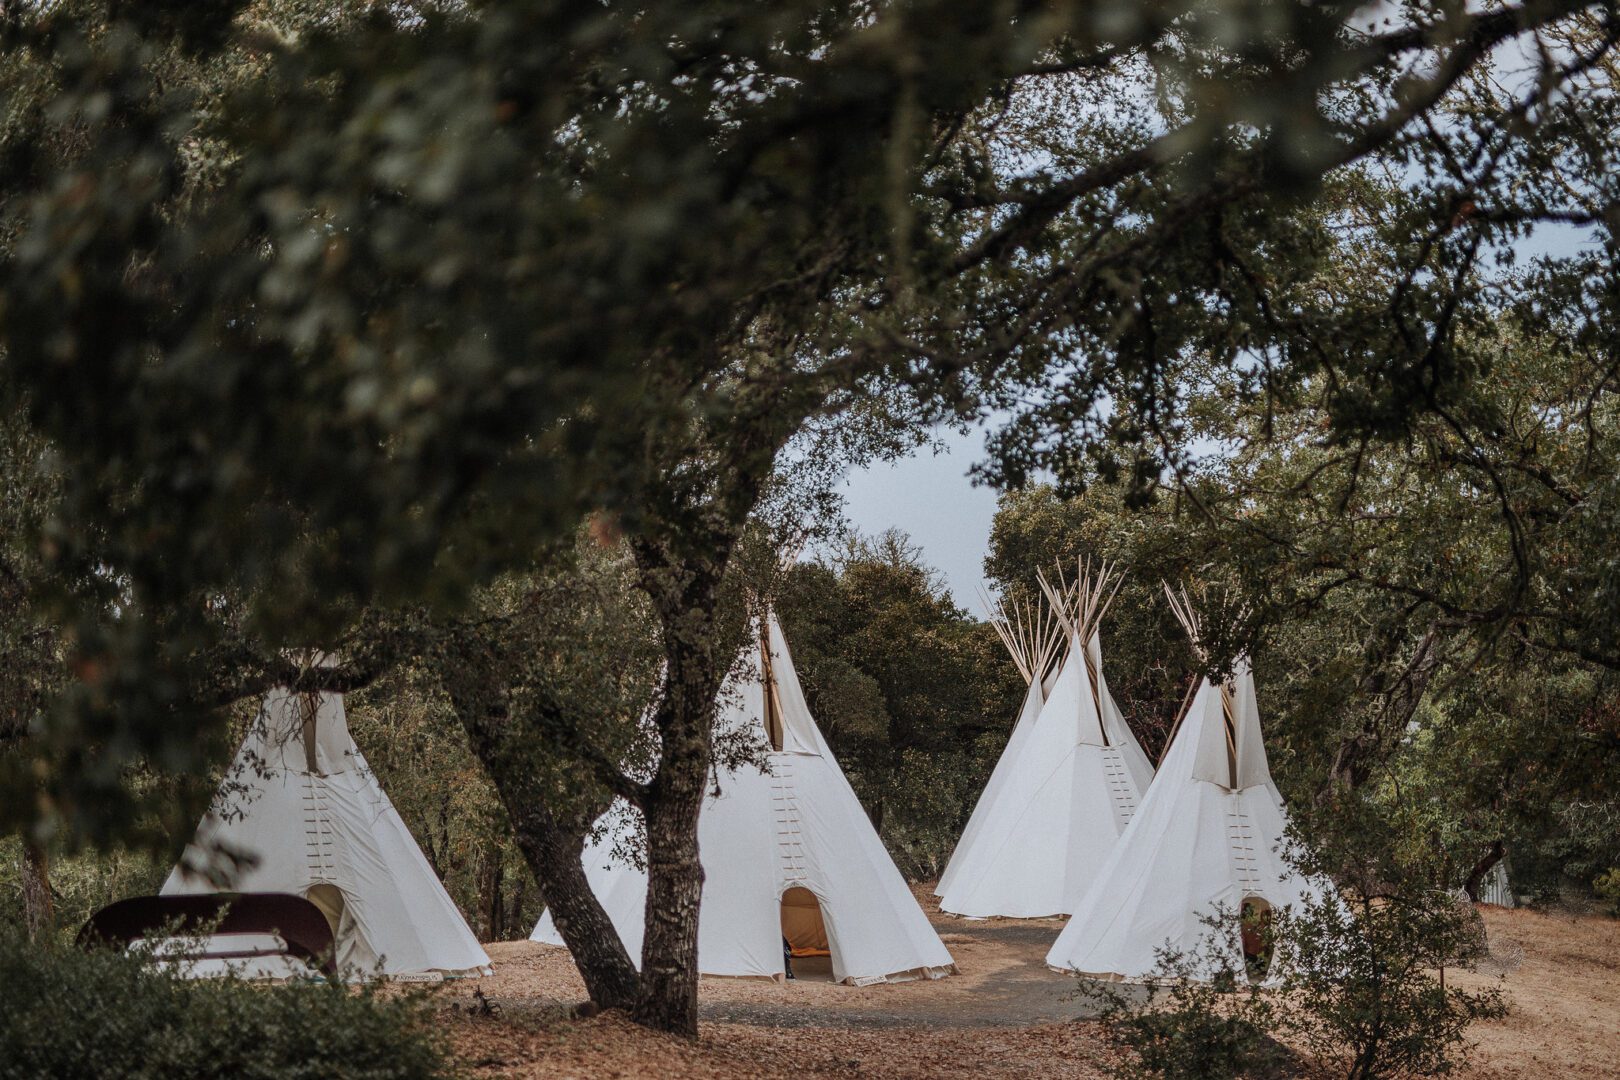 A group of white teepees in a wooded area.